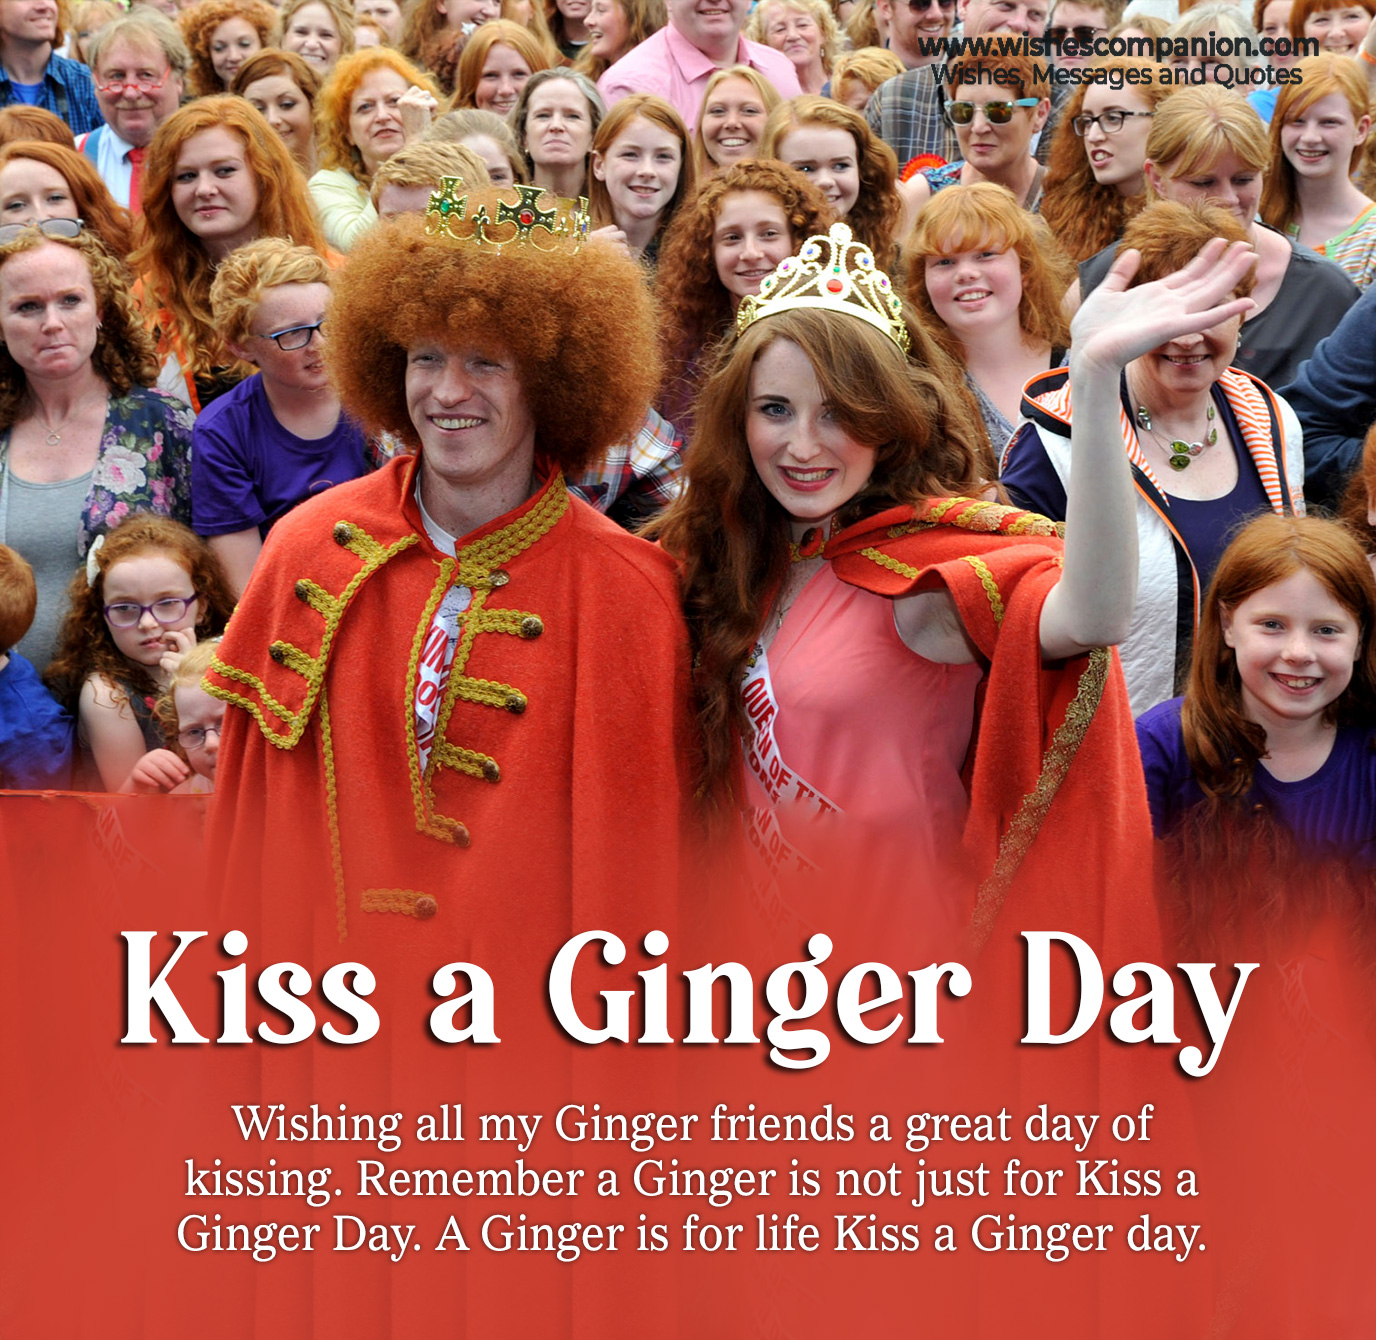 National Kiss a Ginger Day